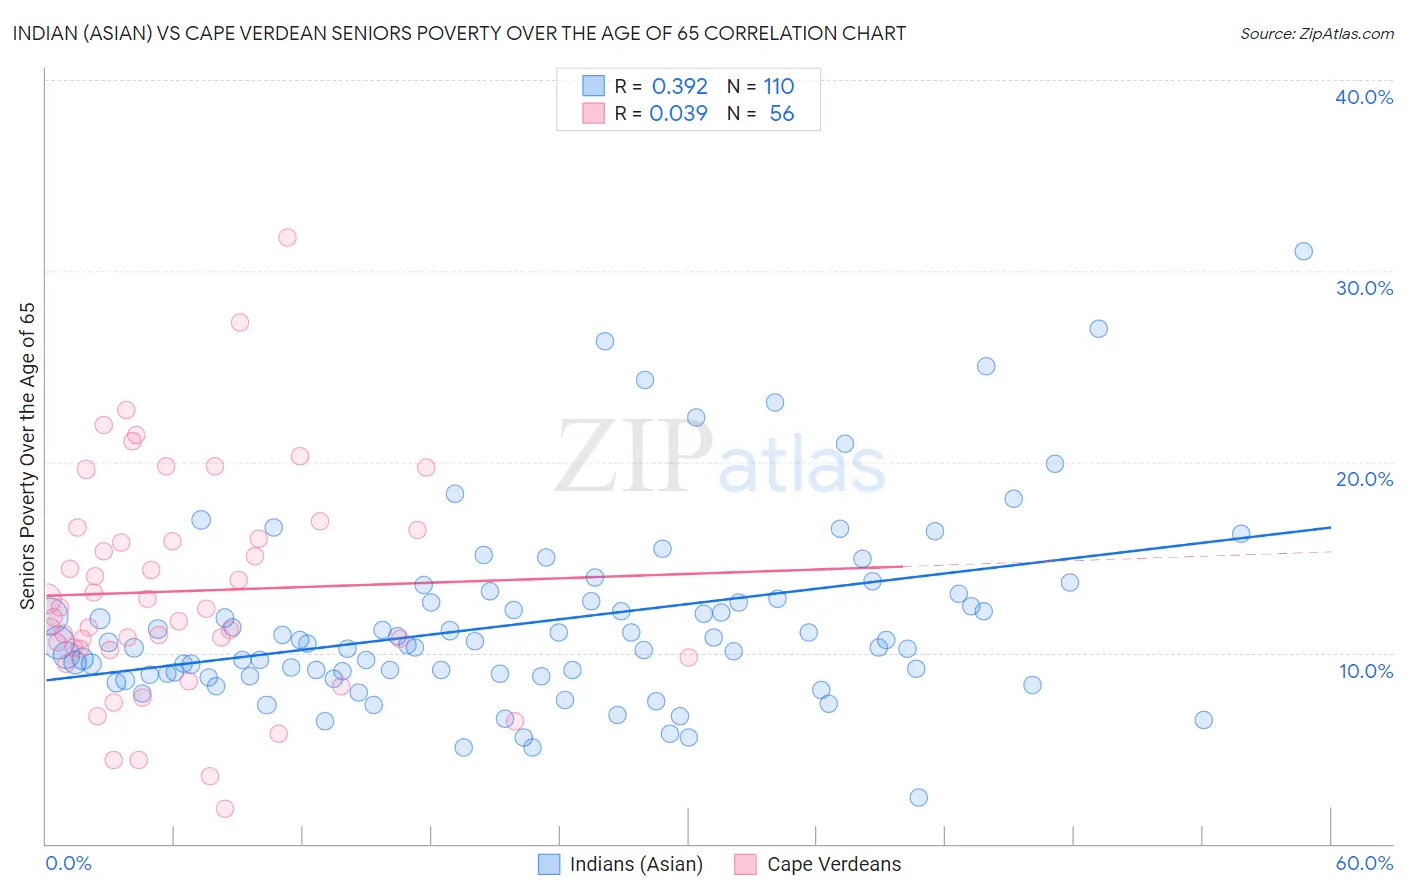 Indian (Asian) vs Cape Verdean Seniors Poverty Over the Age of 65